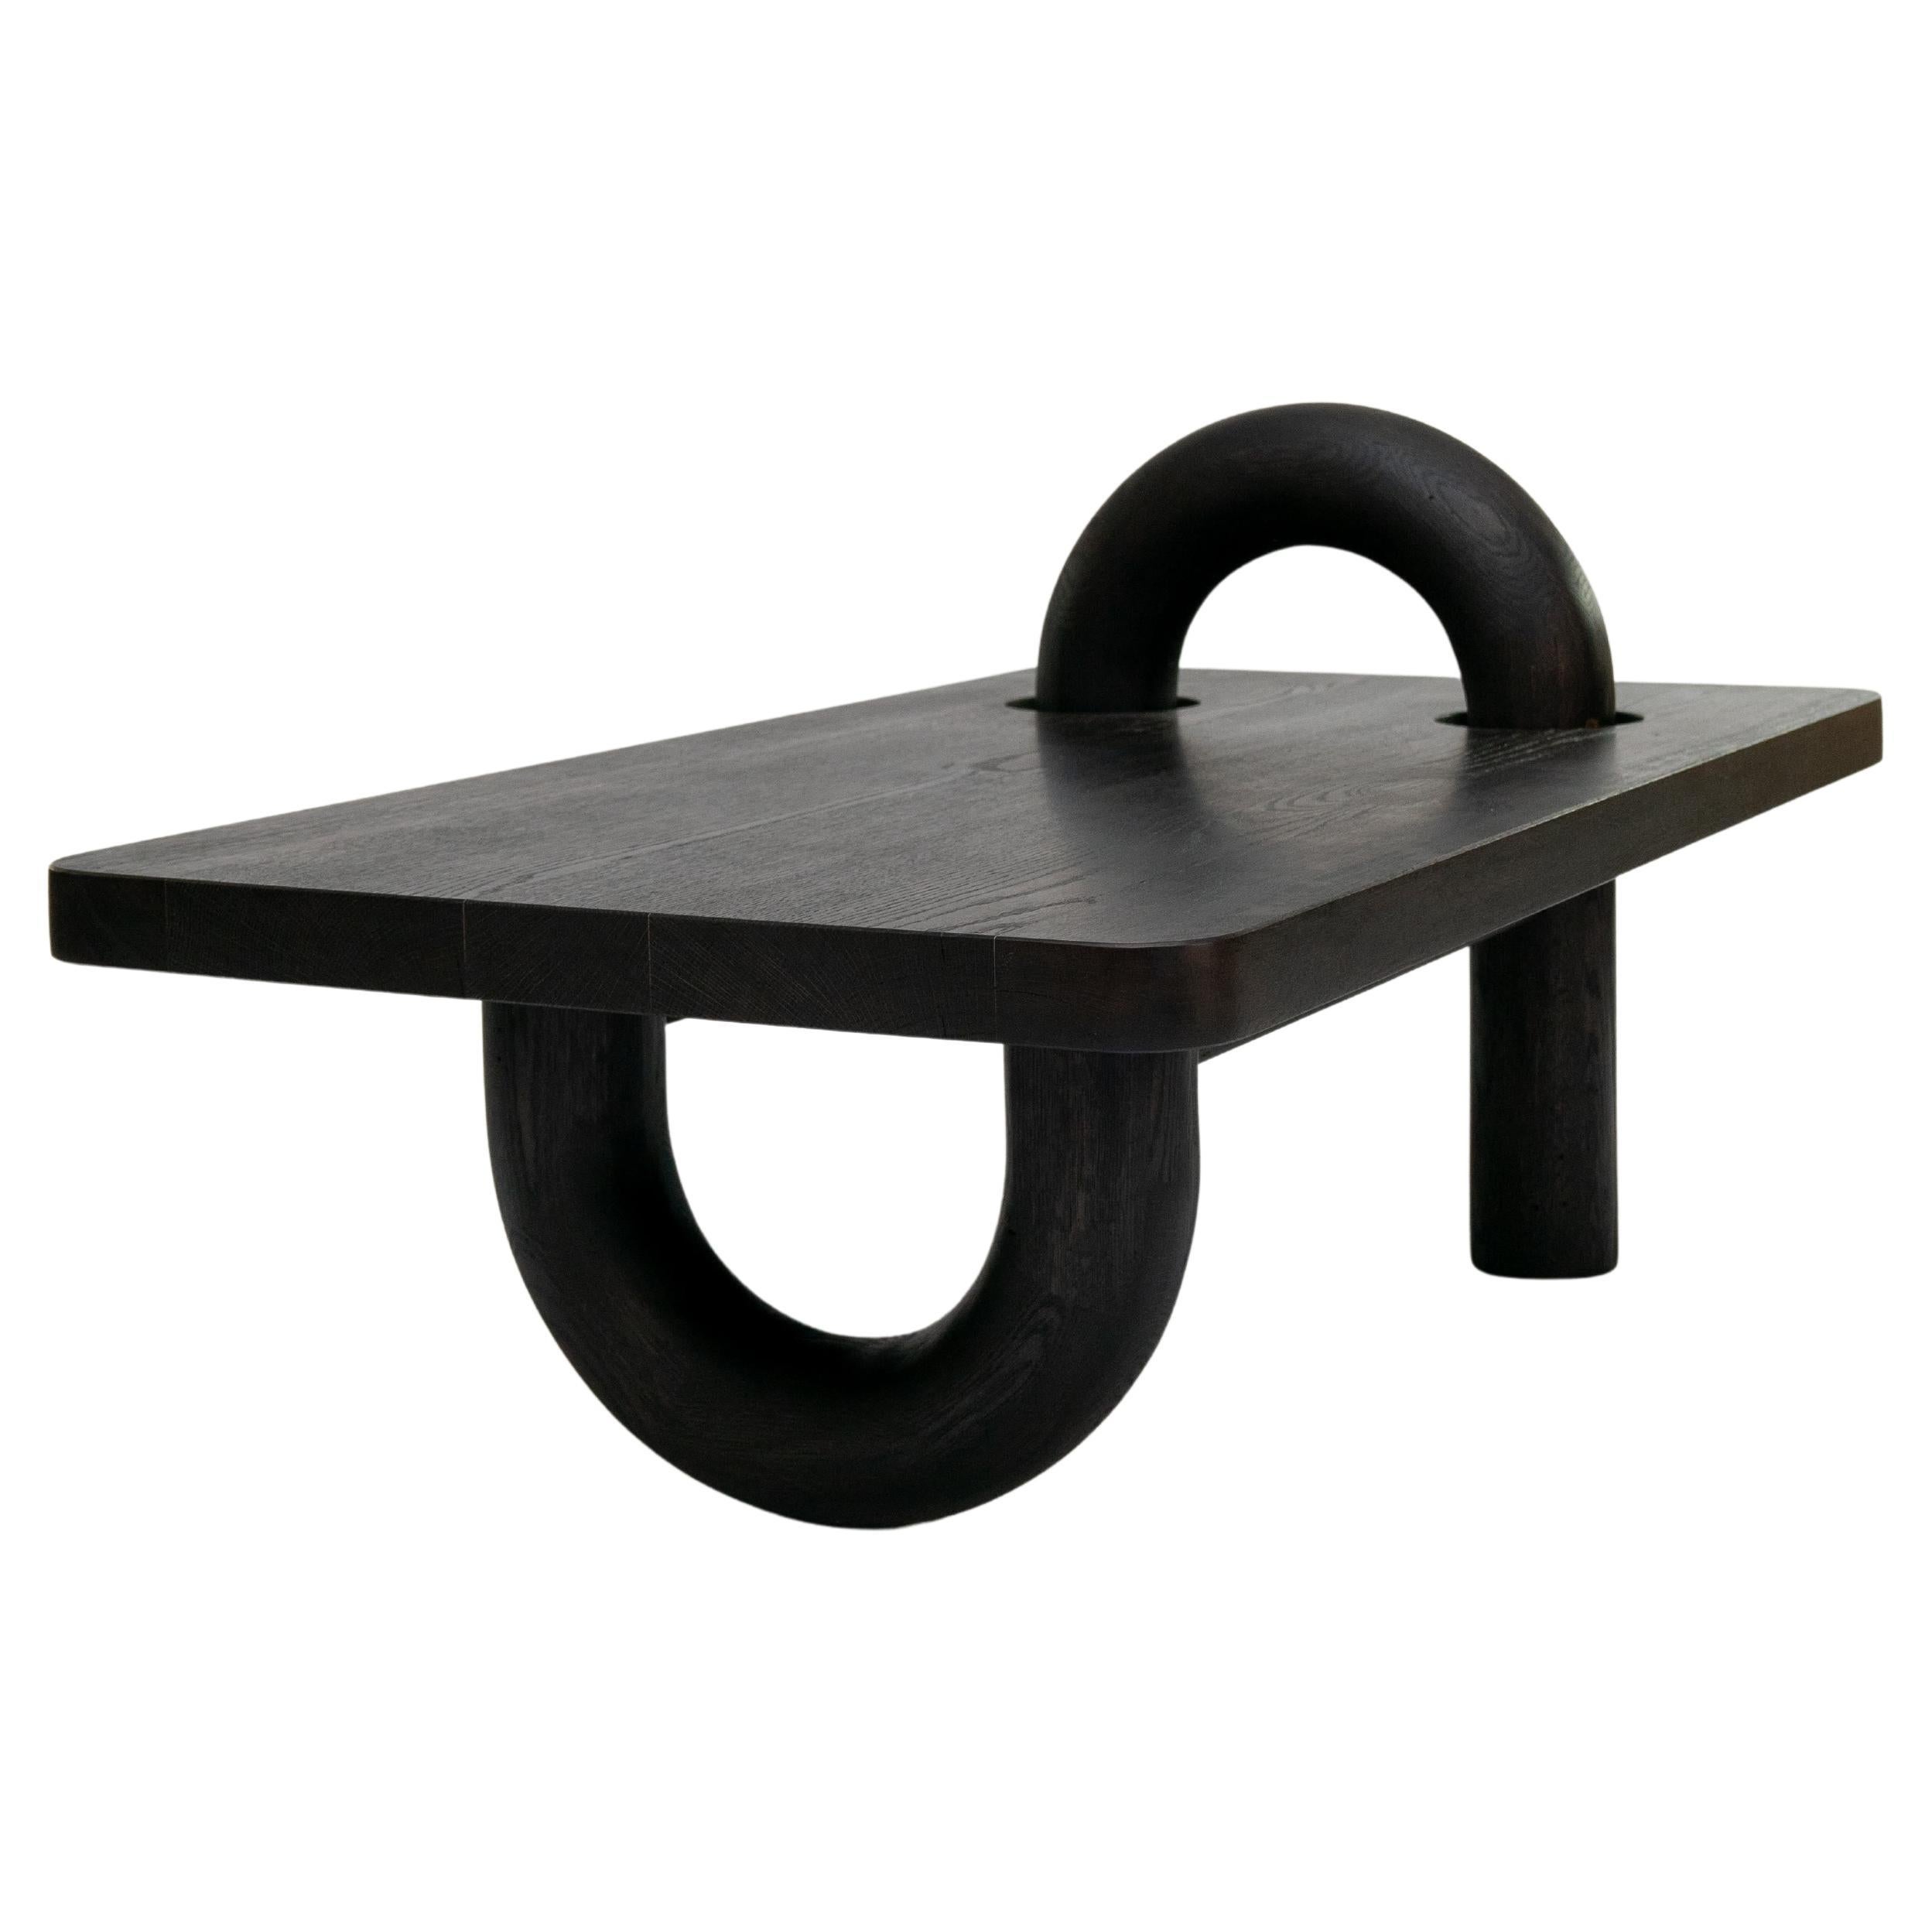 Sculptural Coffee Table / Statement Piece by 9 & 19 For Sale